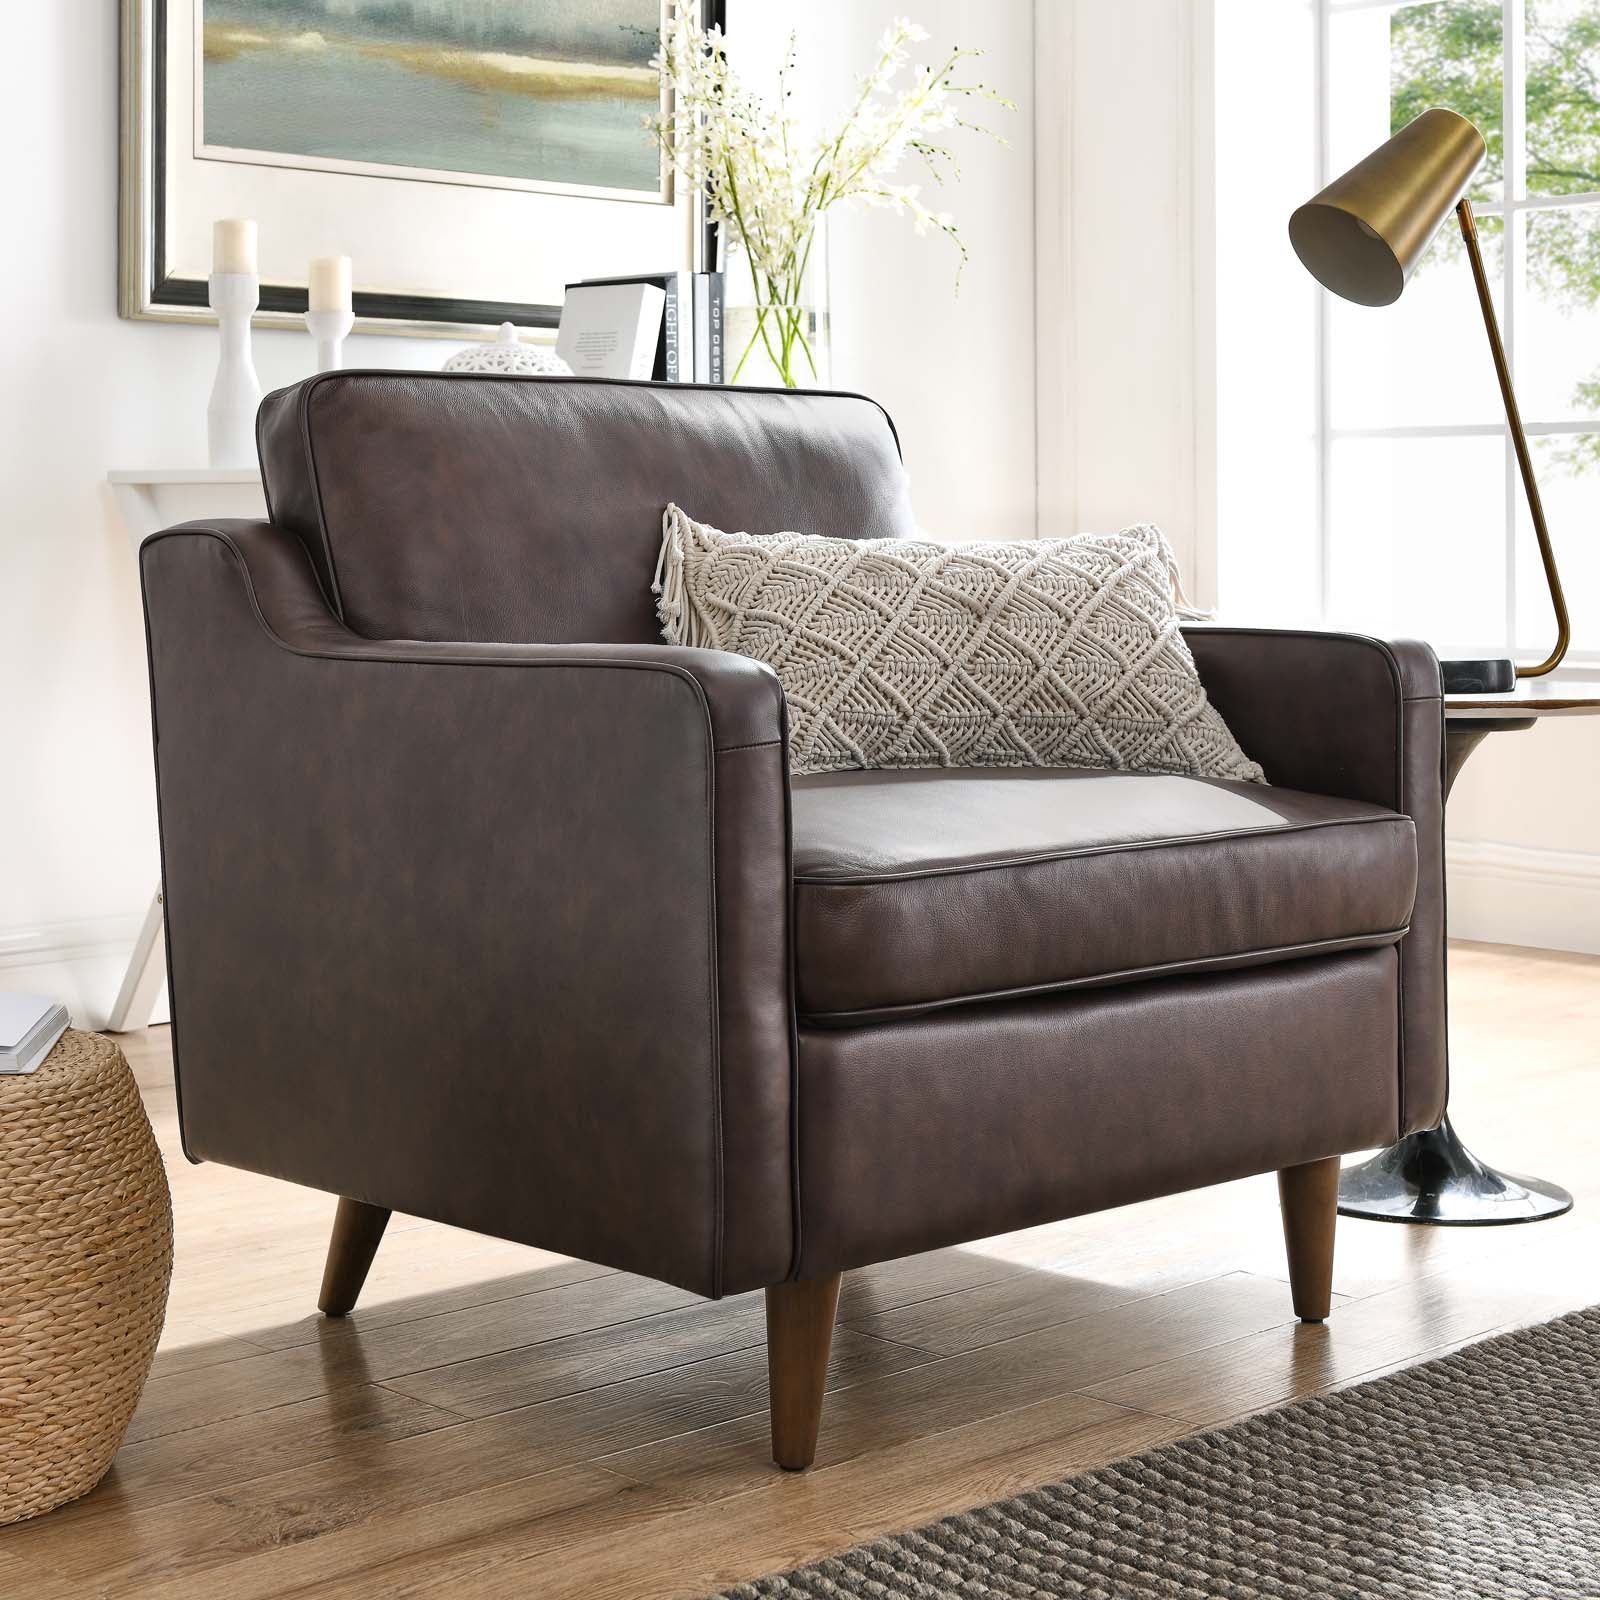 Impart Genuine Leather Armchair - East Shore Modern Home Furnishings